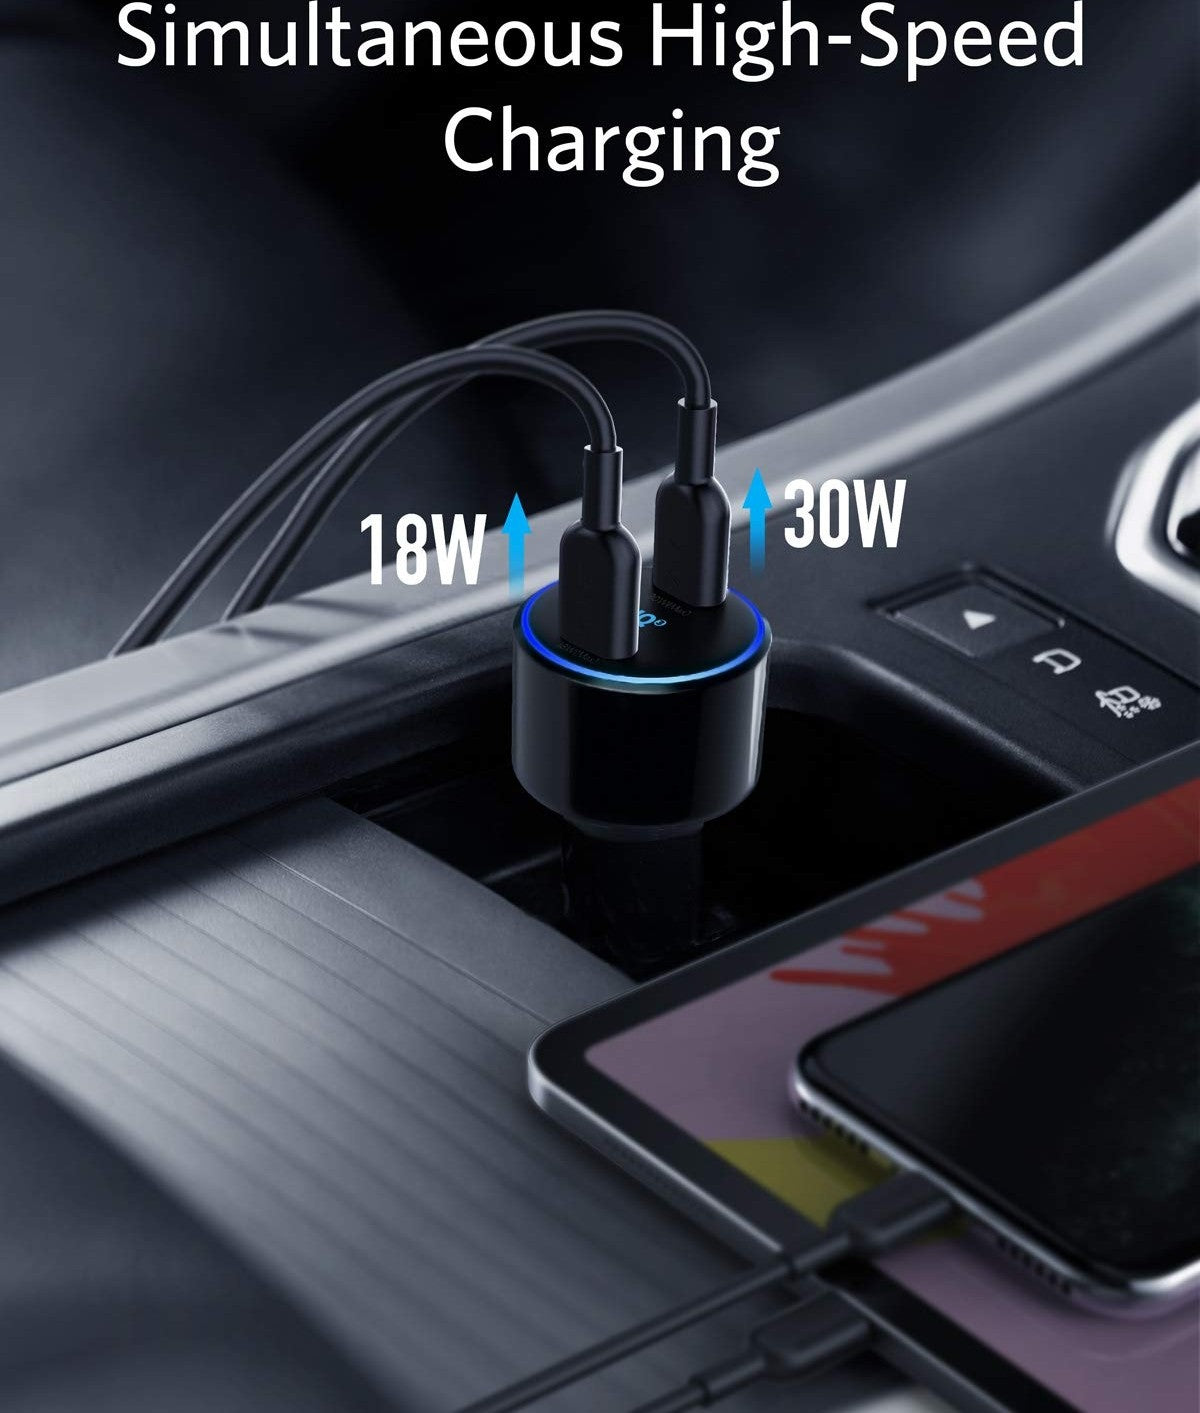 ANKER PowerDrive + III Duo Car Charger